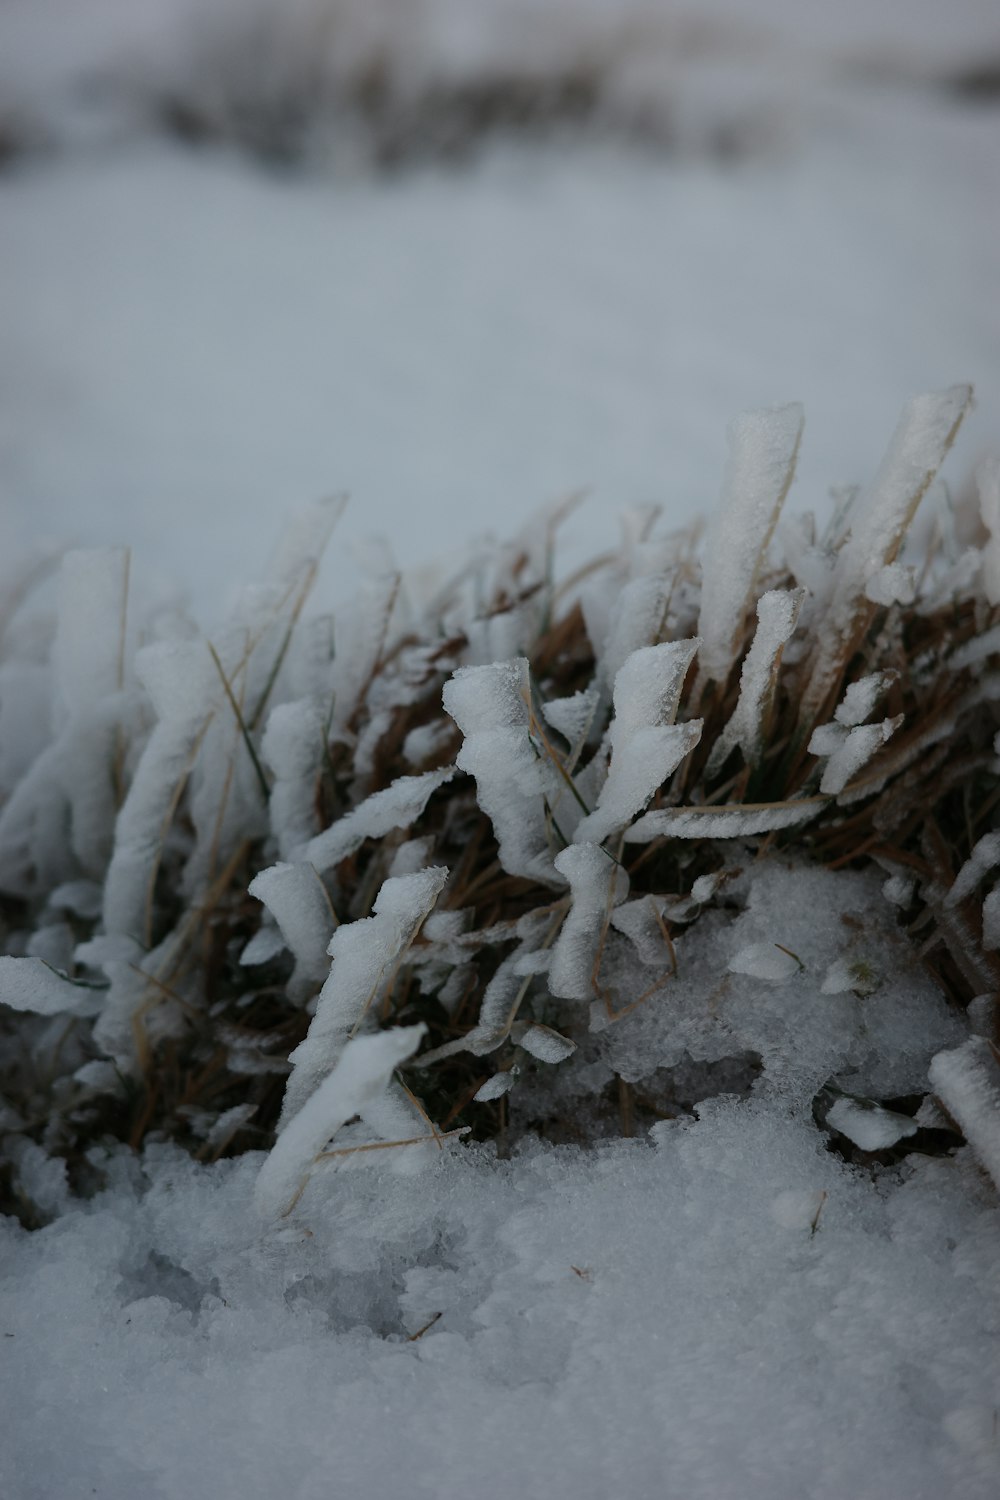 a close up of snow covered plants in the snow